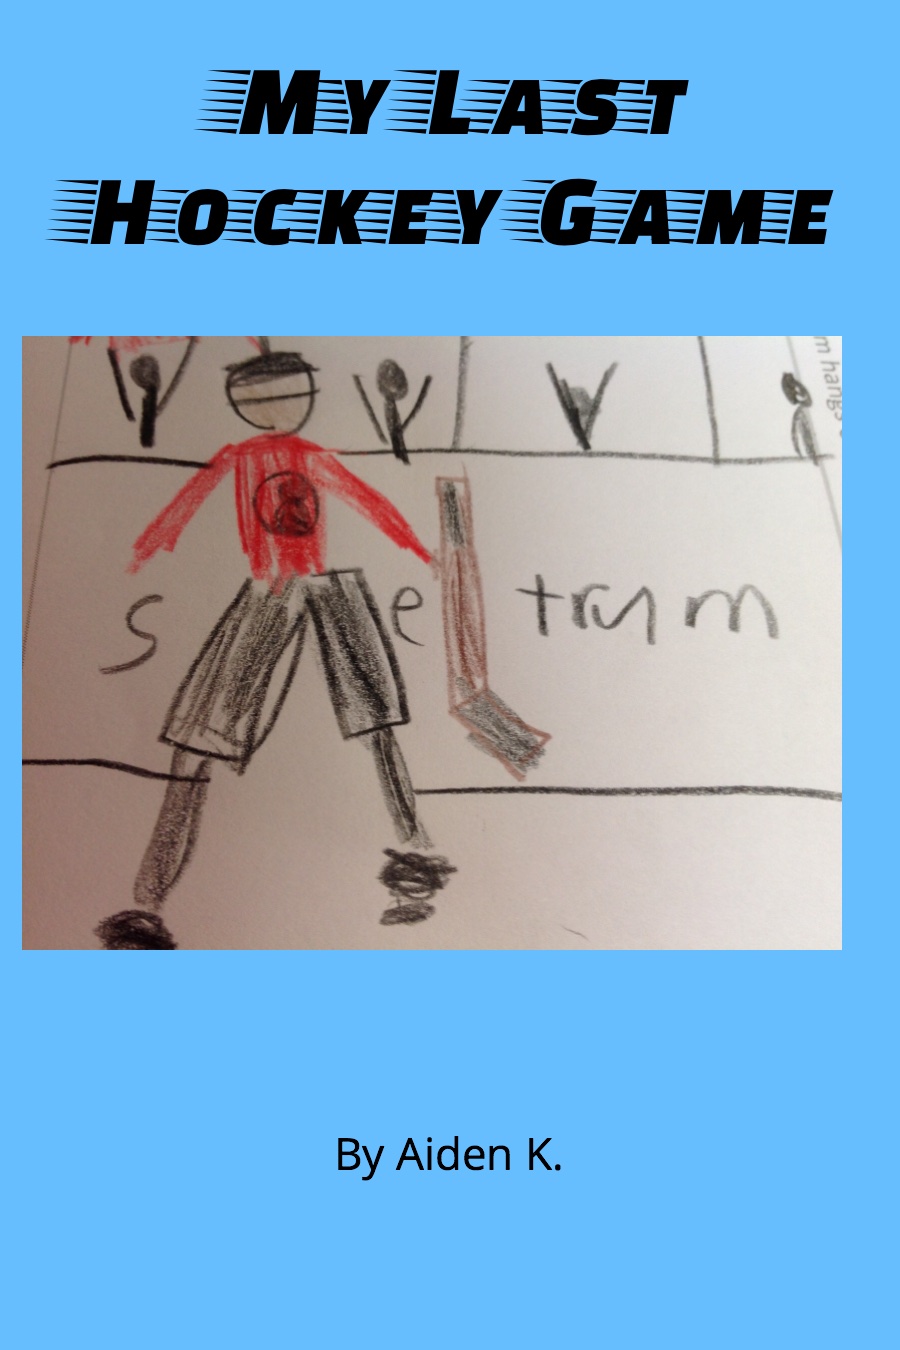 My Last Hockey Game by Aiden K-1